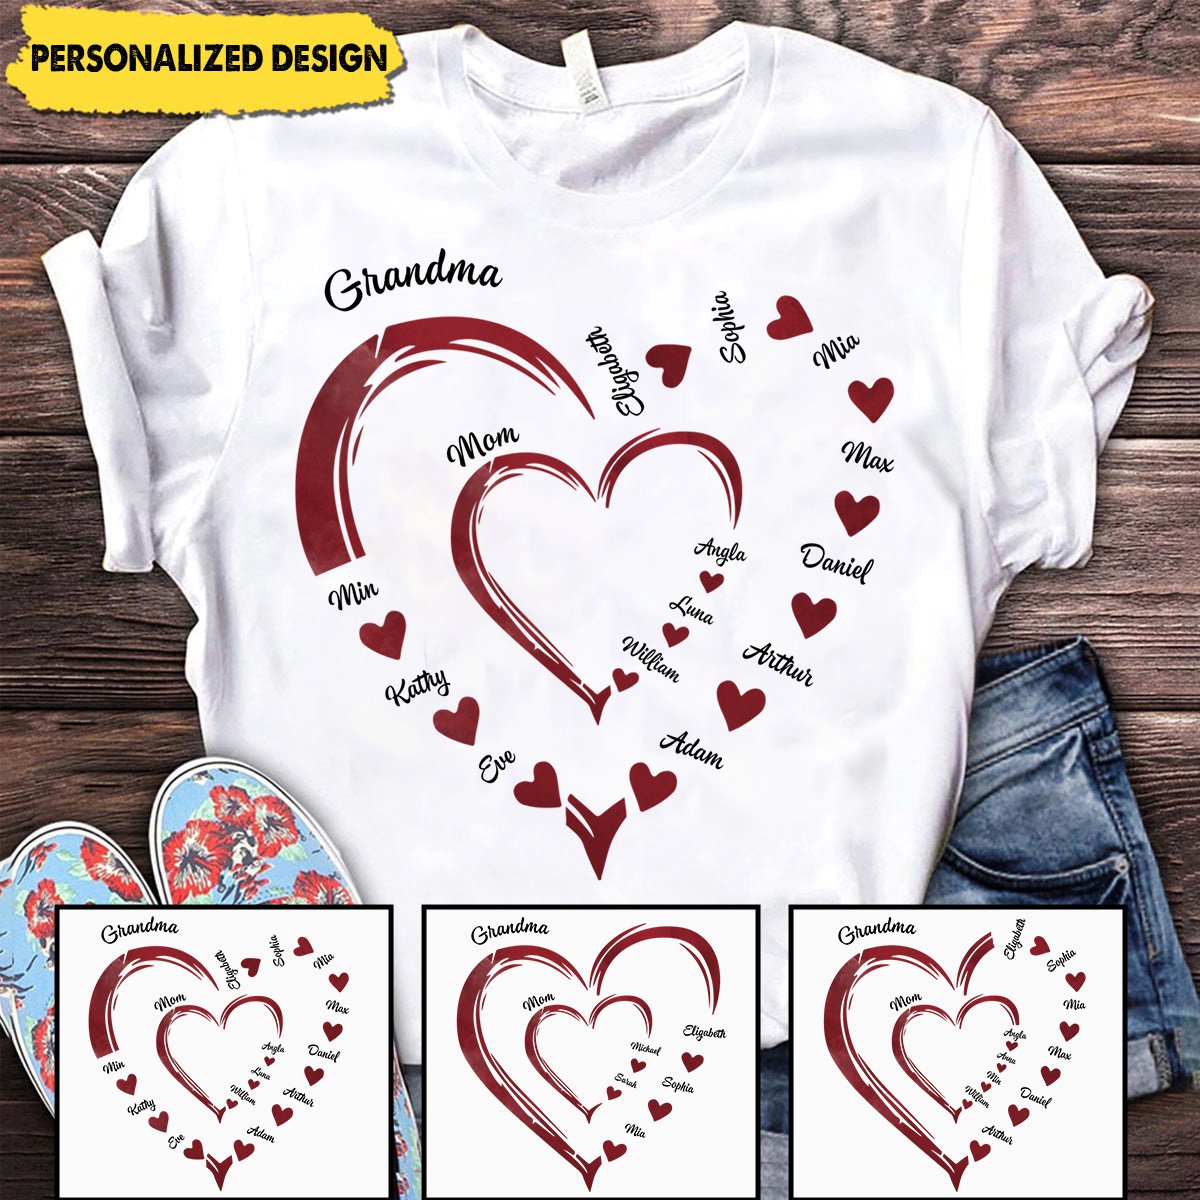 Mommy's Sweethearts - Family Personalized Custom Unisex T-shirt - Gift For Grandma